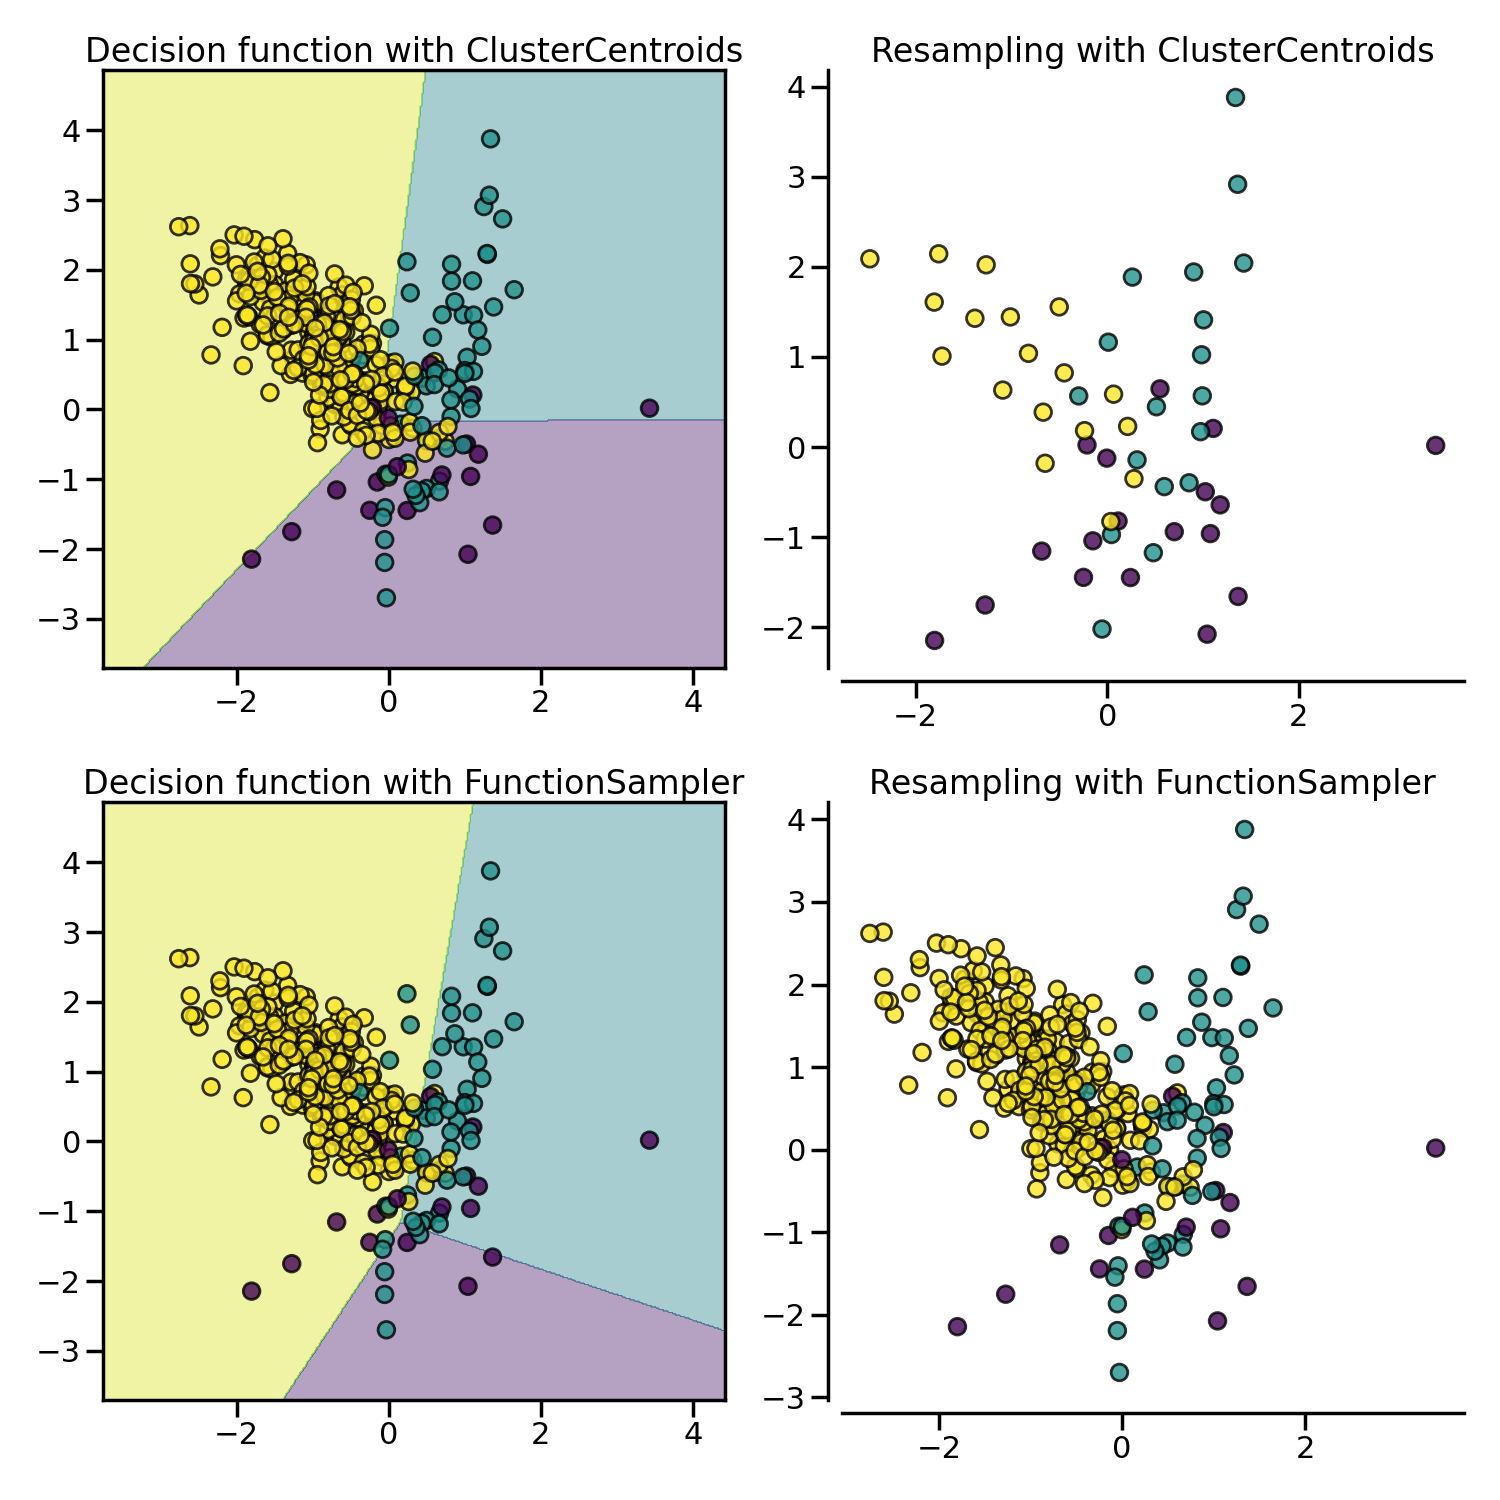 Decision function with ClusterCentroids, Resampling with ClusterCentroids, Decision function with FunctionSampler, Resampling with FunctionSampler